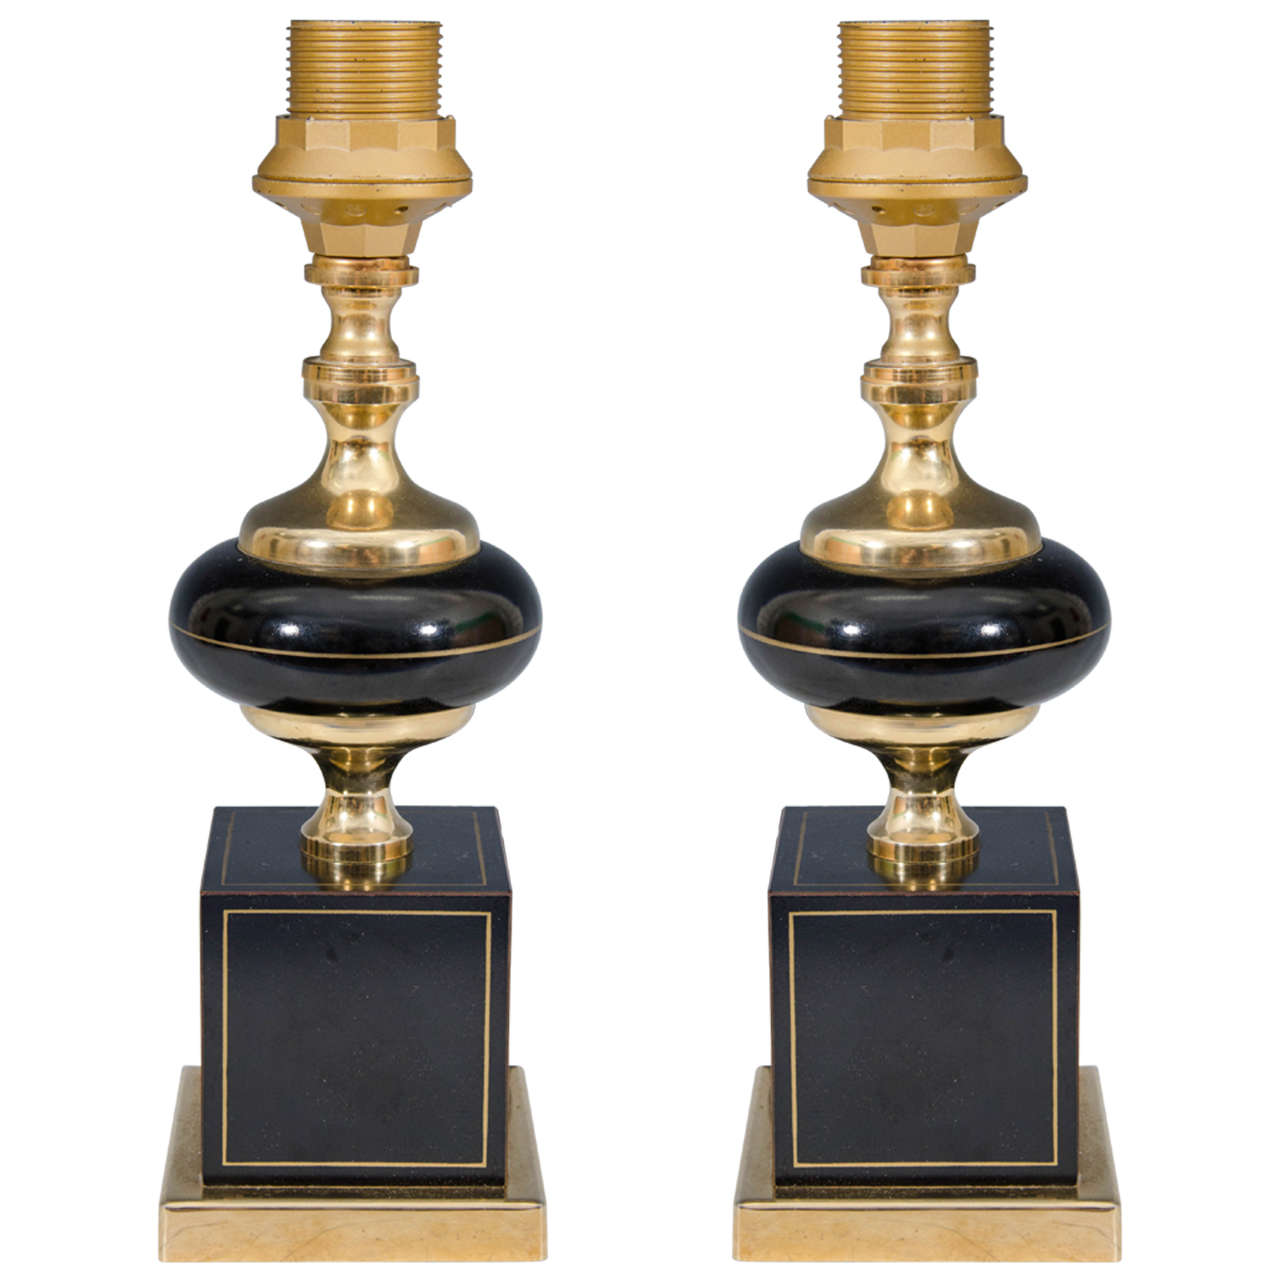 A Pair of French Midcentury Black Enamel and Brass Bedside Lamps at 1stdibs